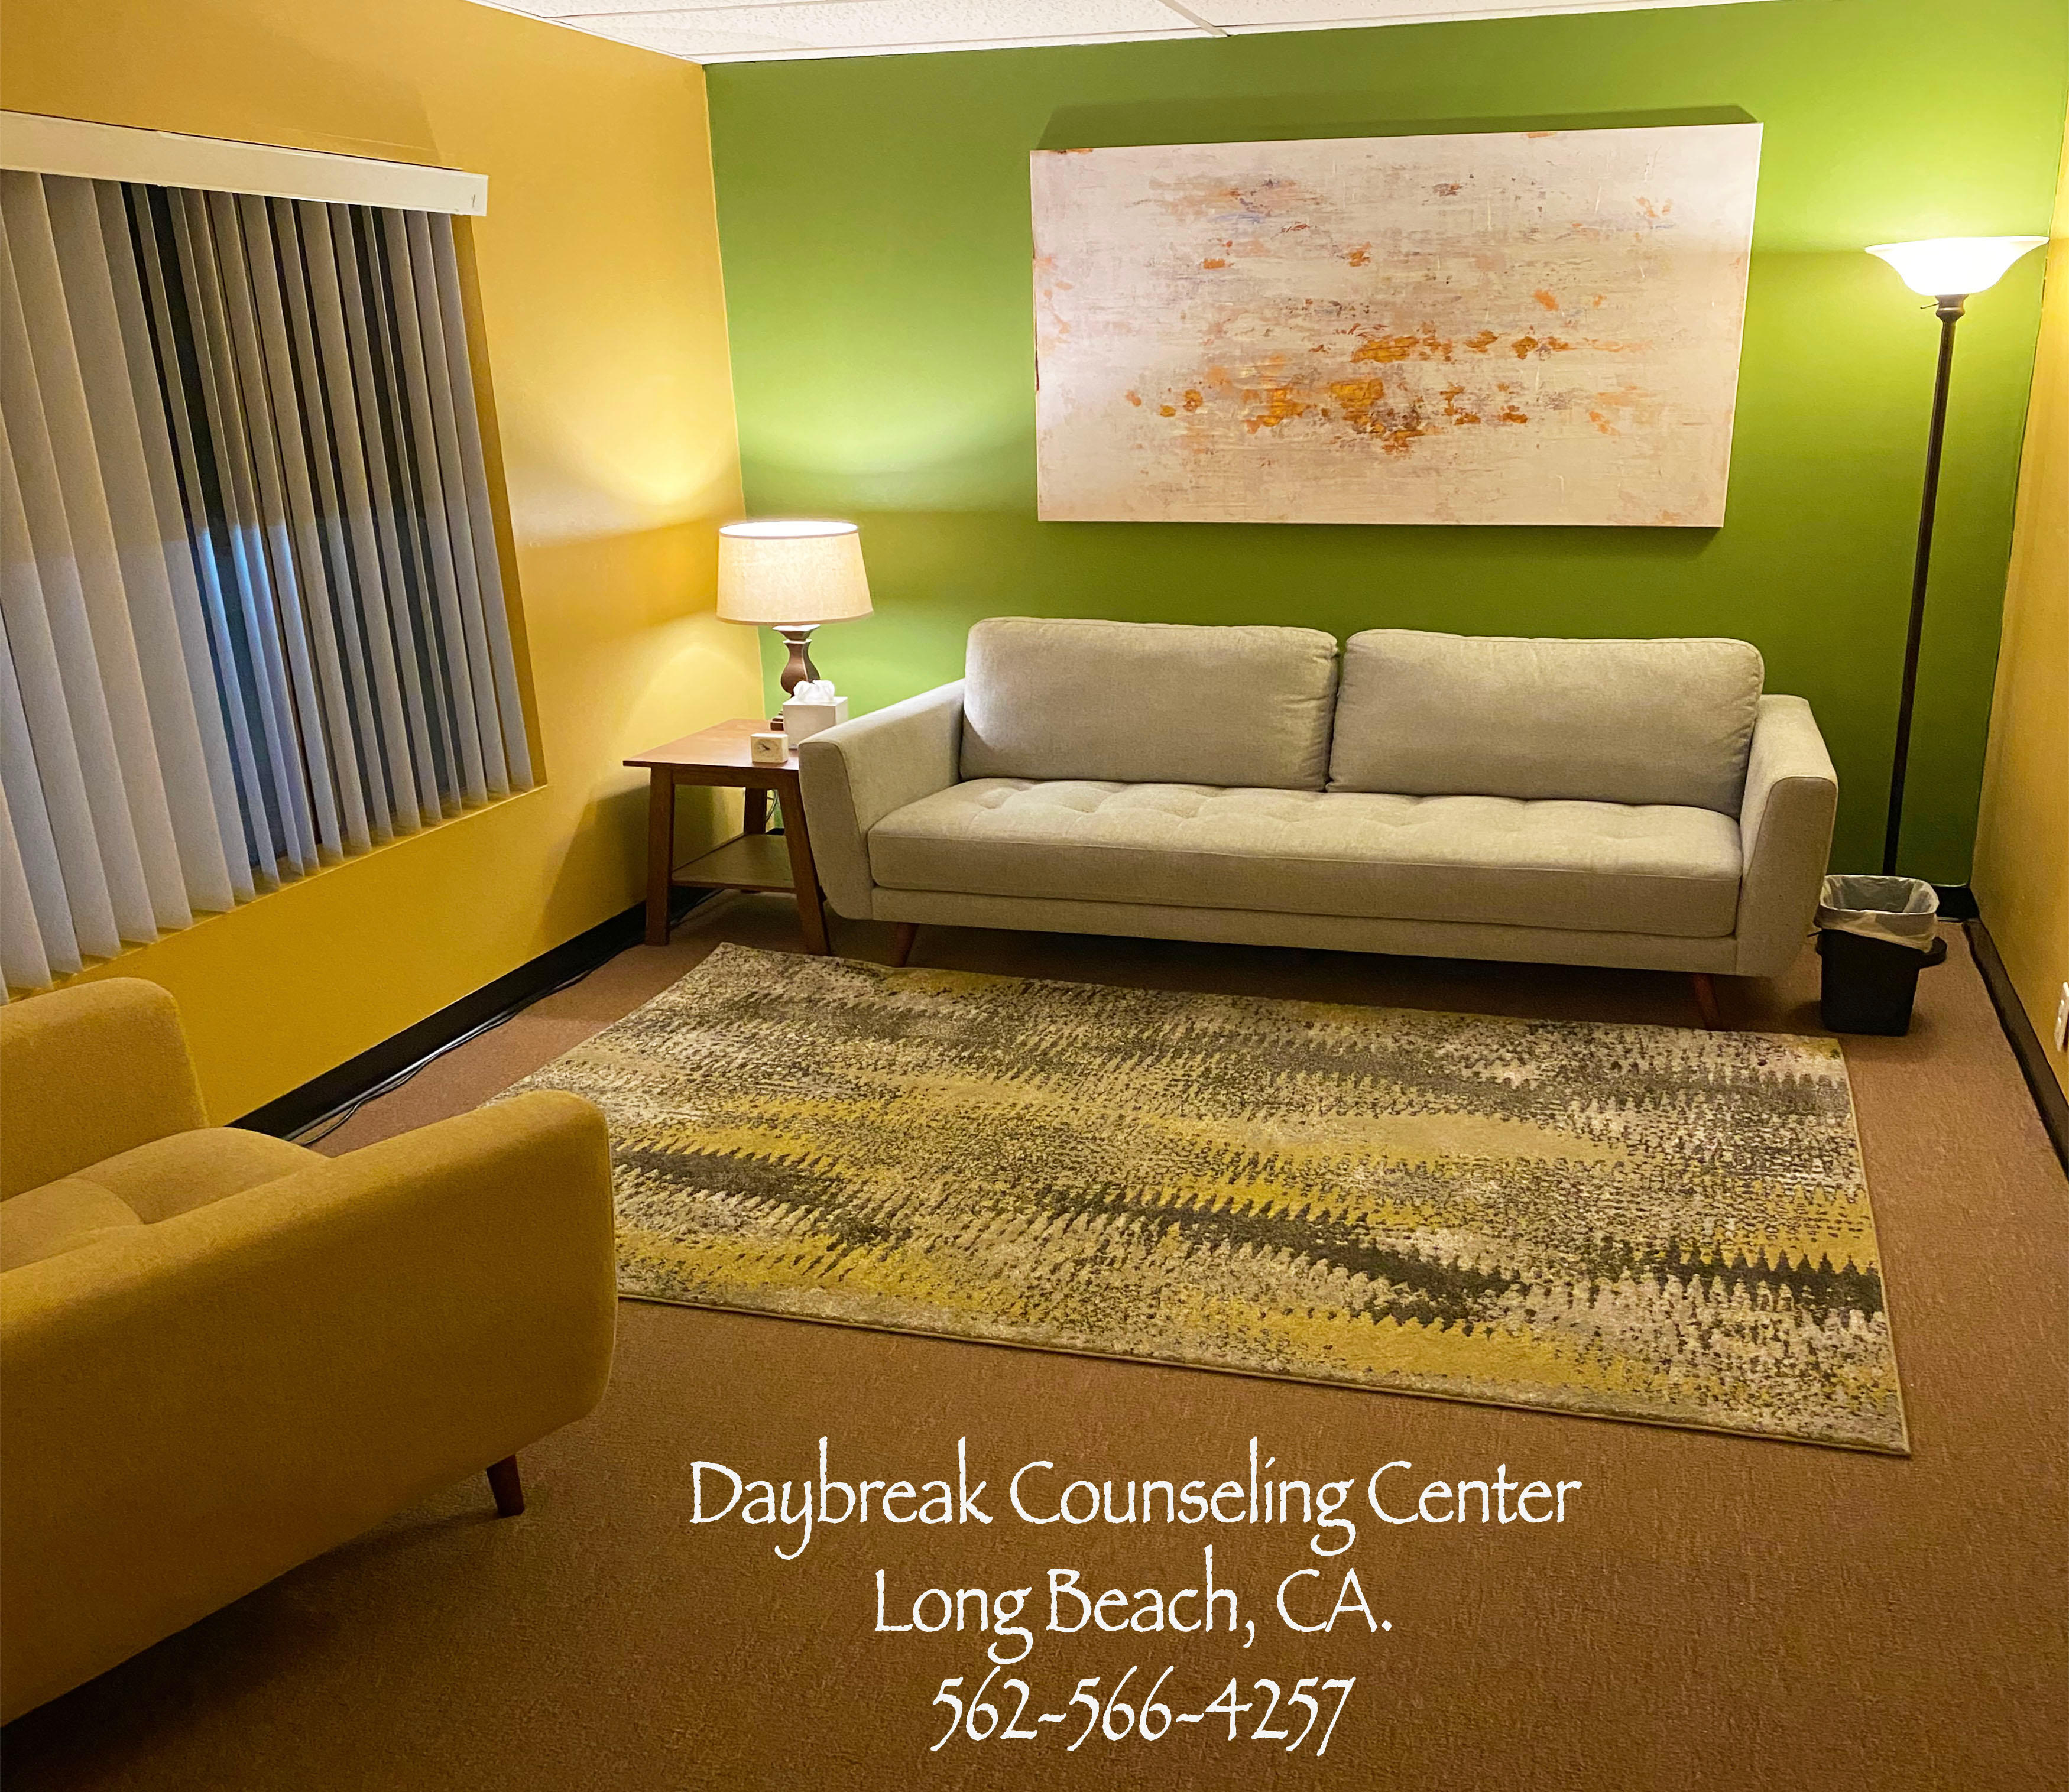 Daybreak Counseling Center Suite #201
Therapy Room A